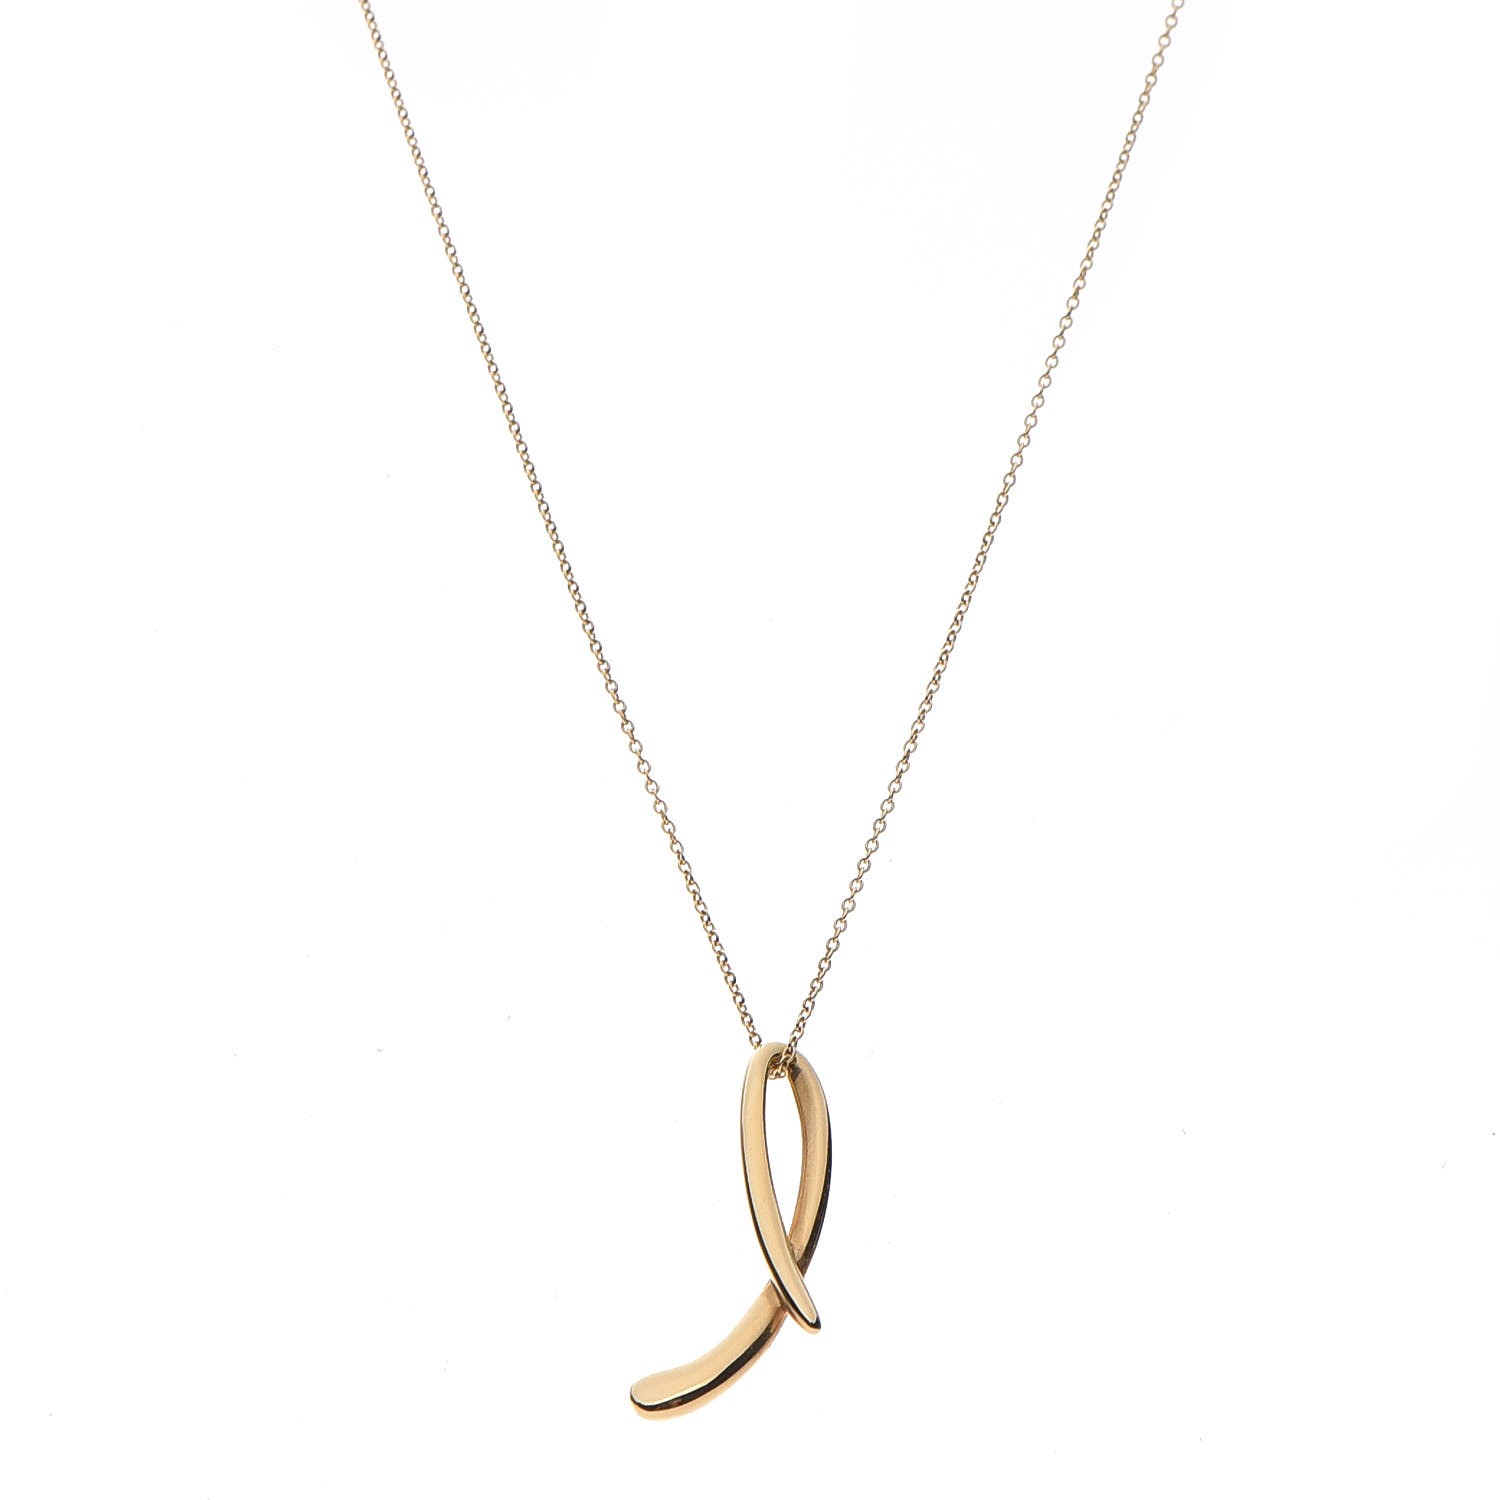 tiffany letter l necklace